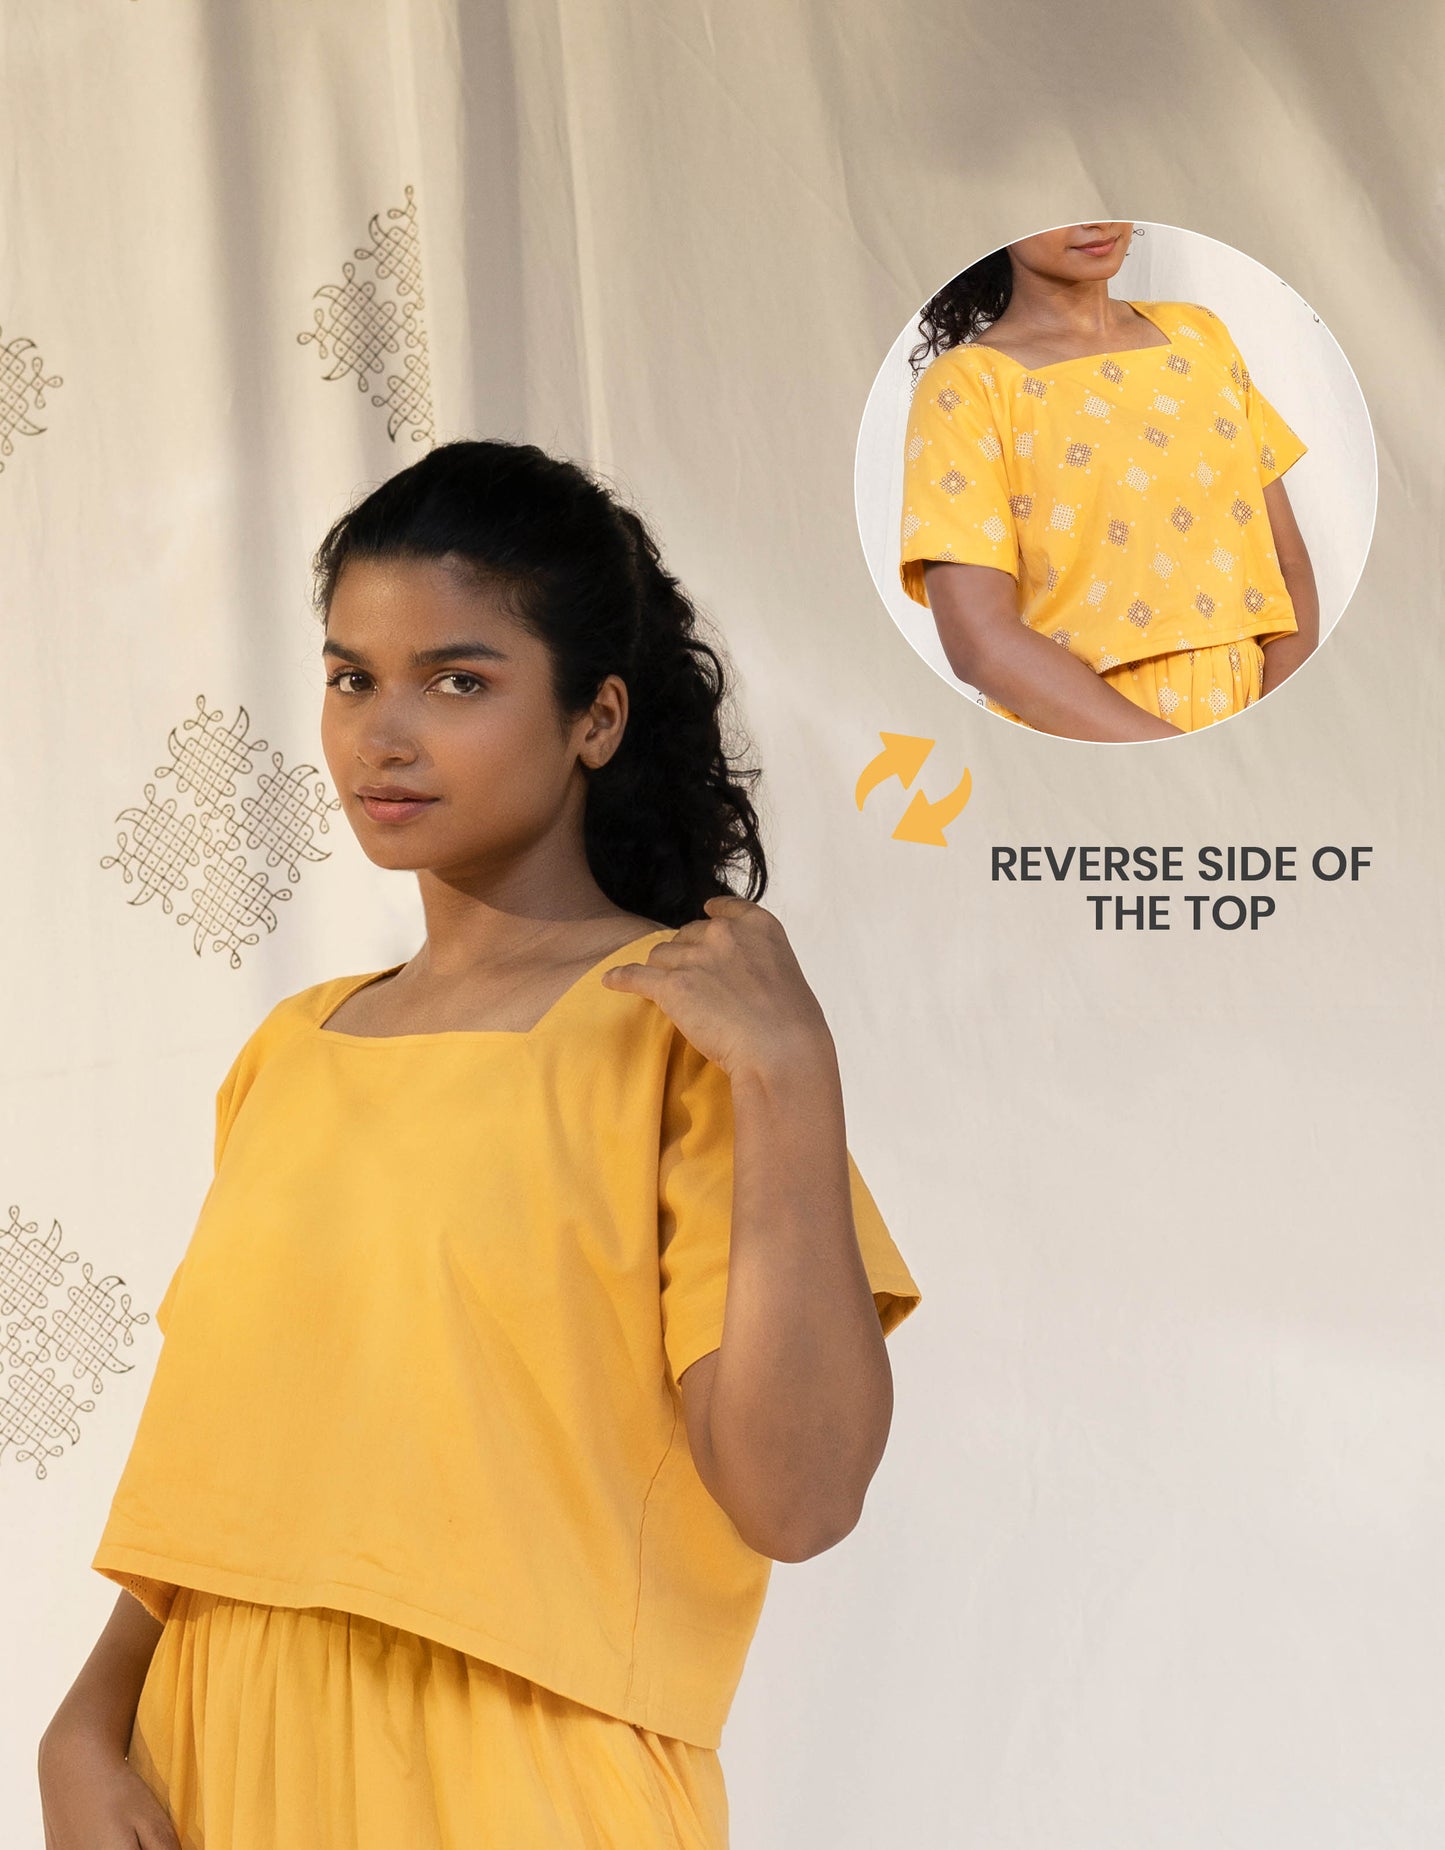 Front view of Hueloom's Reversible Boxy Top in Yellow showing versatile reversible option with Kolam print